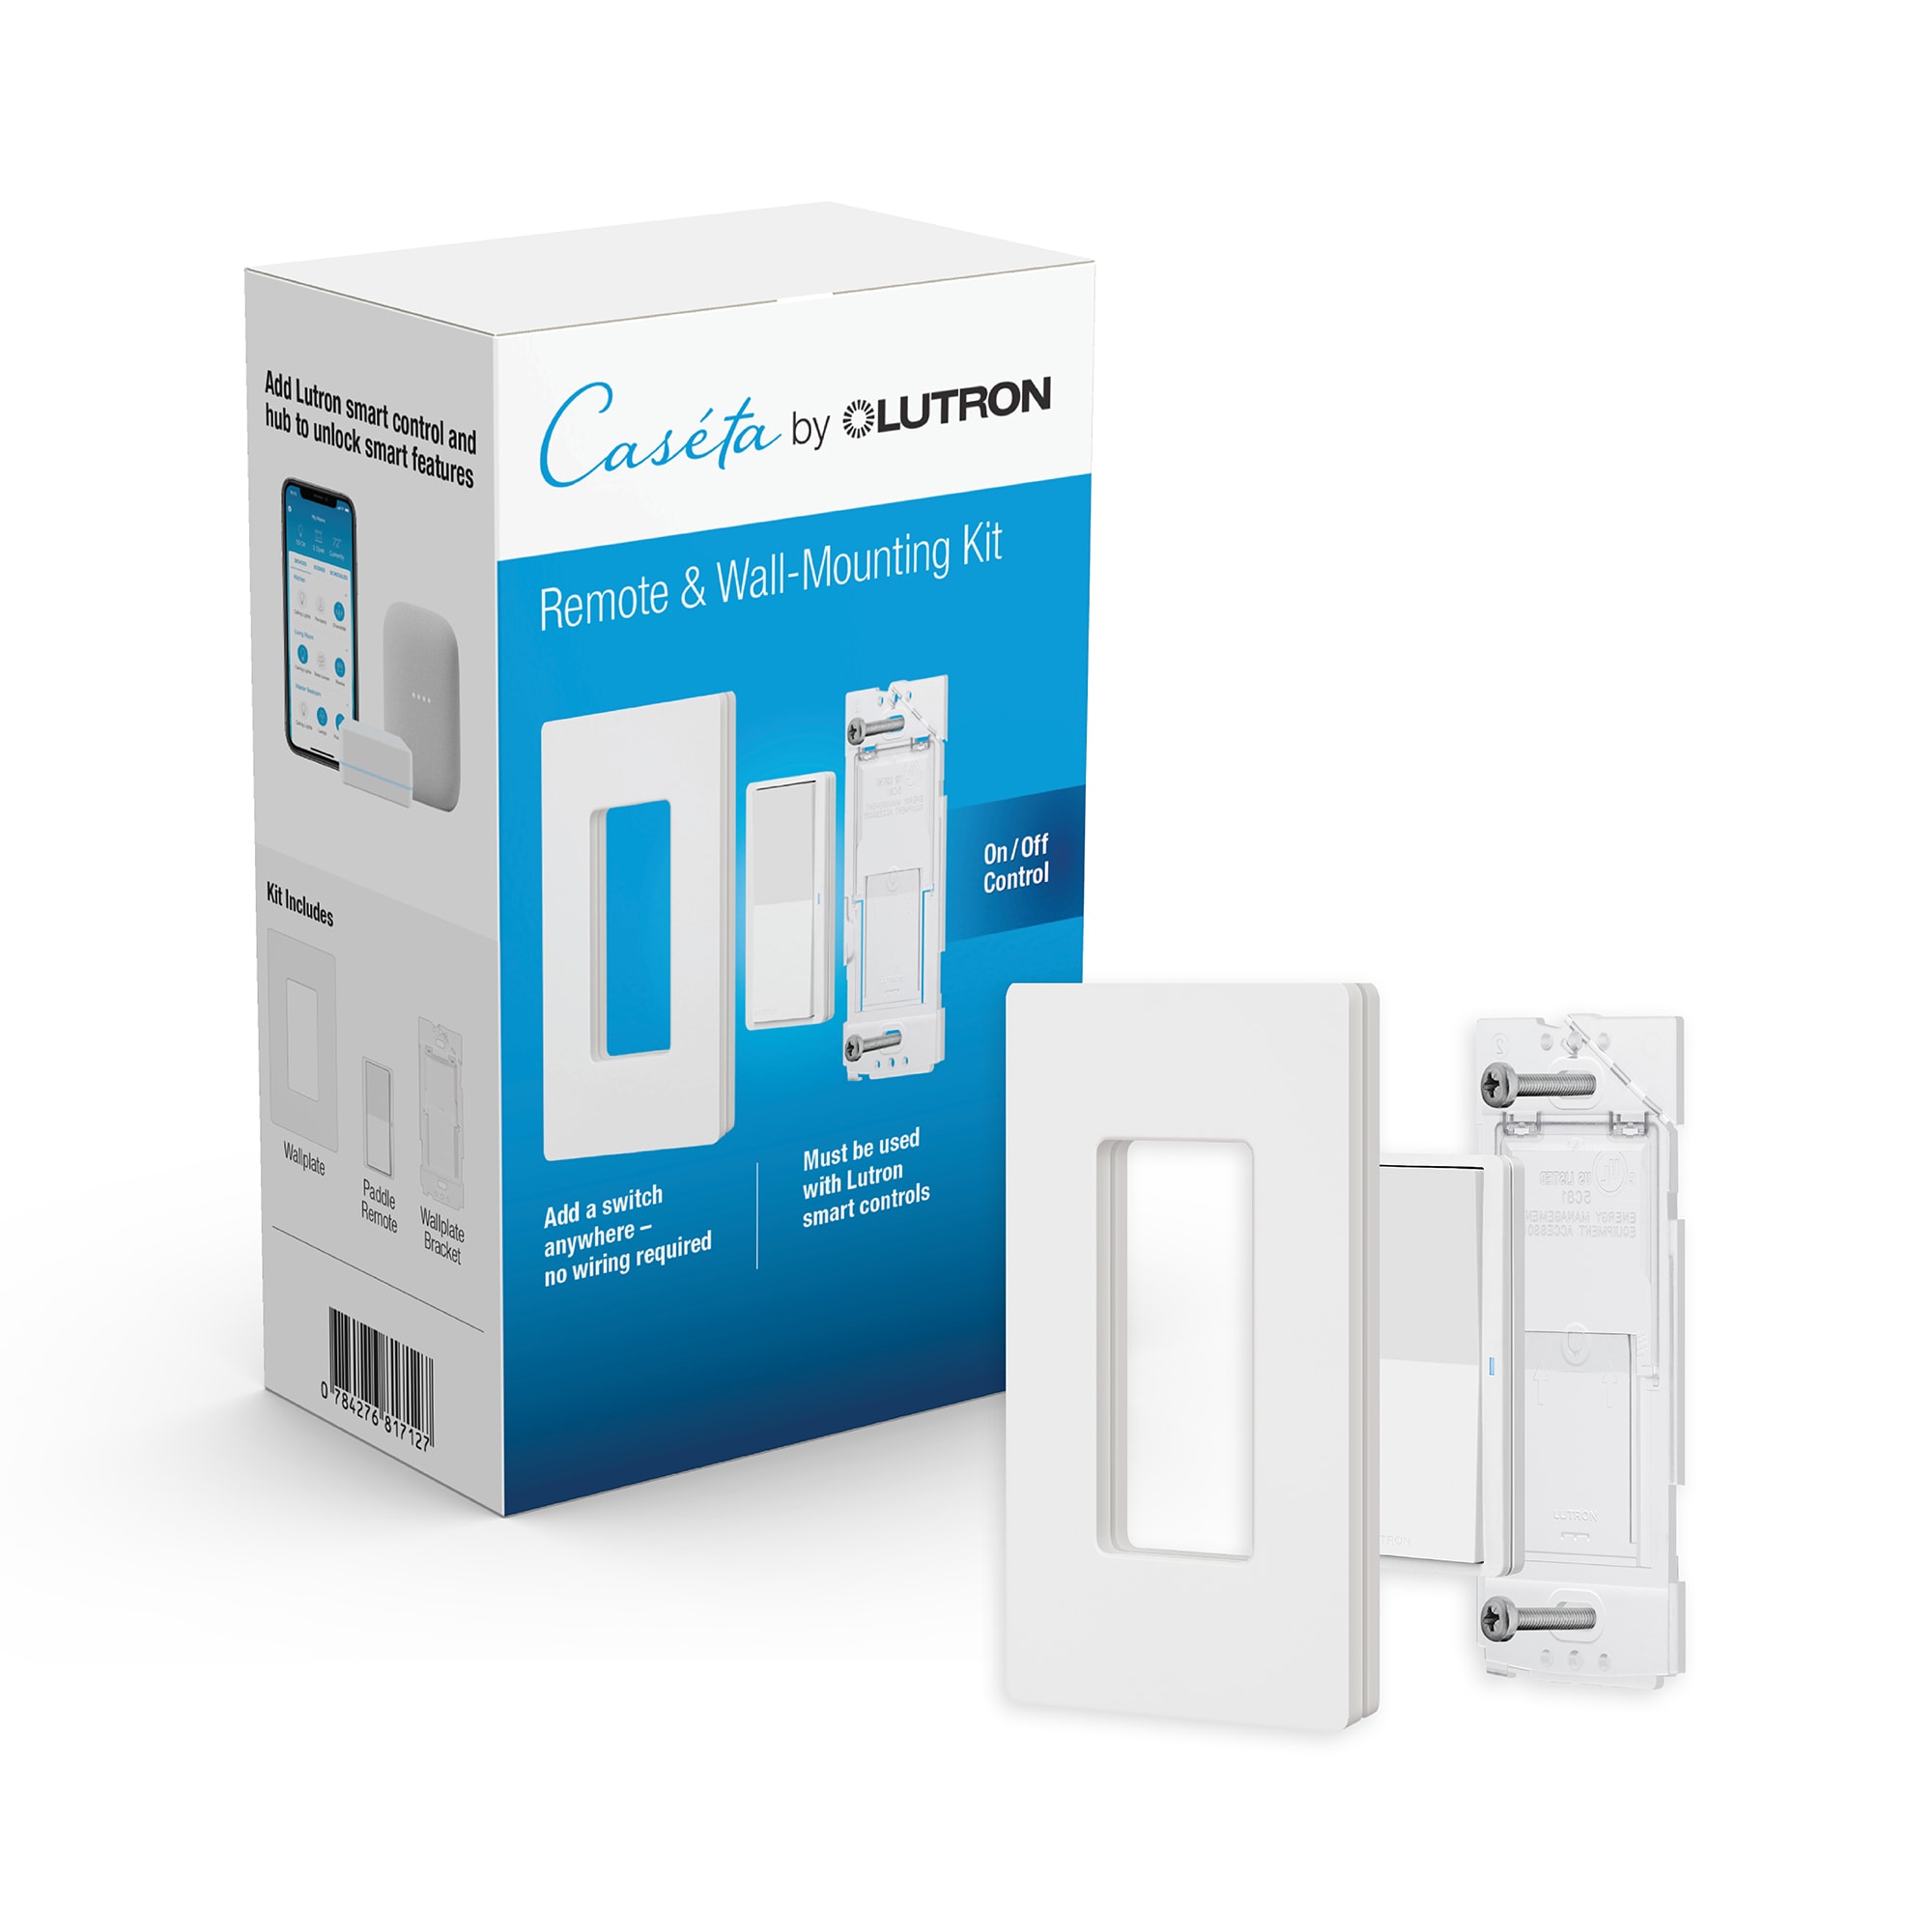 Caseta Plug-in Lamp Dimmer with Pico Remote Control Kit by